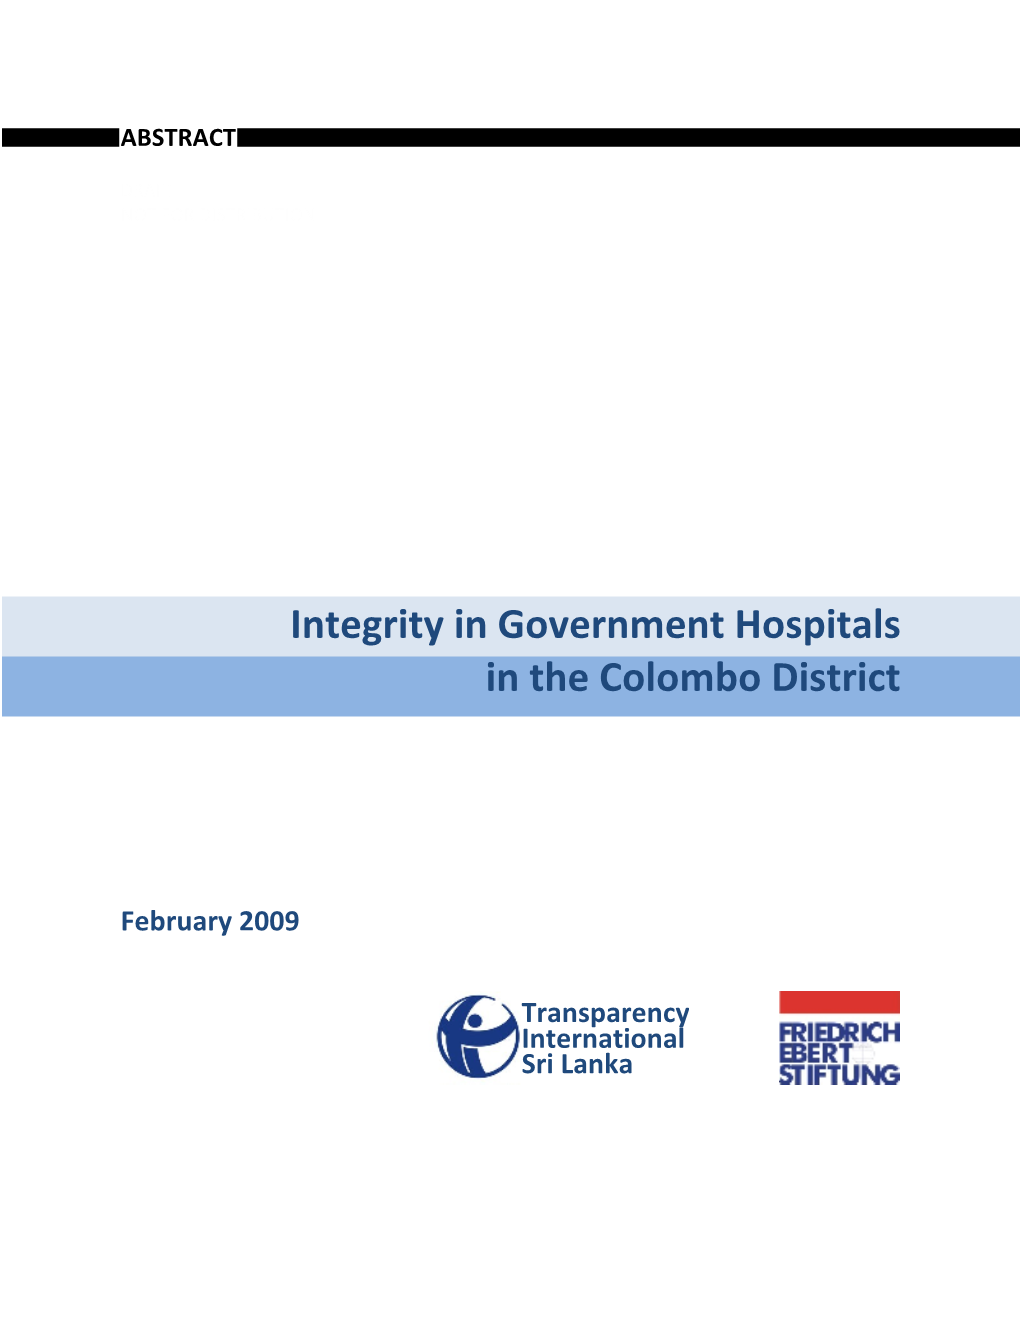 Integrity in Government Hospitals in the Colombo District